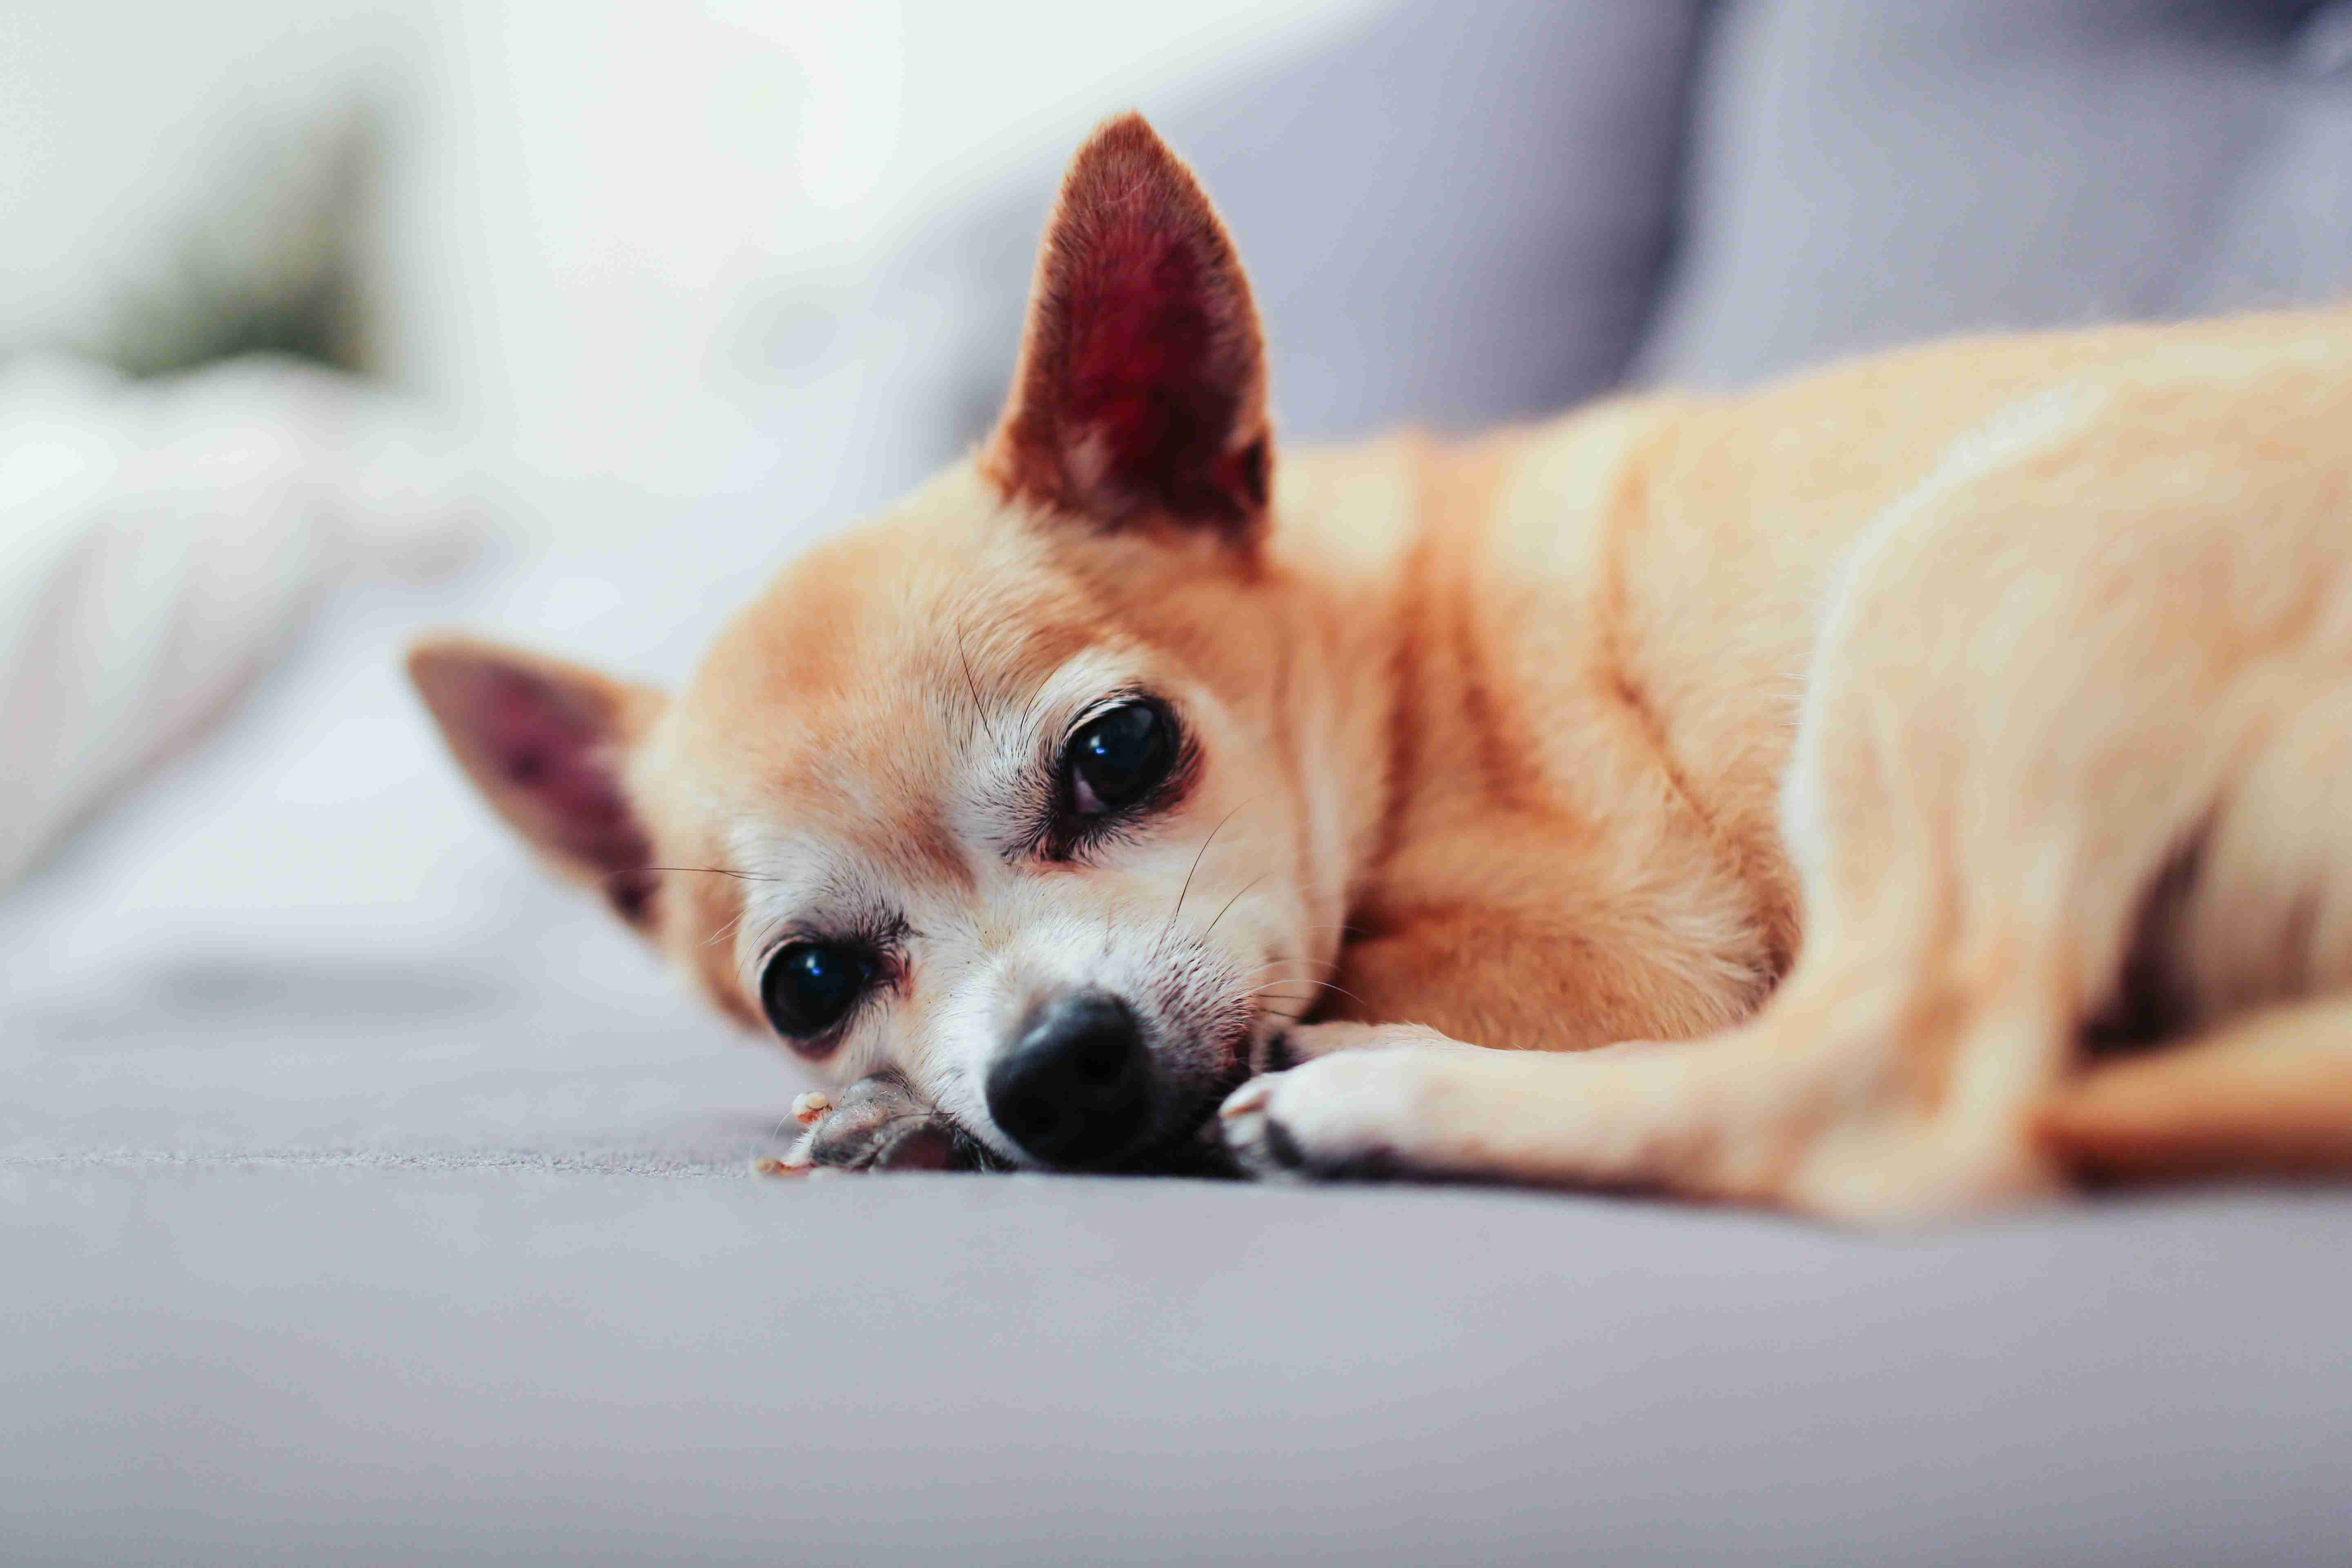 How can you protect yourself and others from a potentially aggressive Chihuahua?